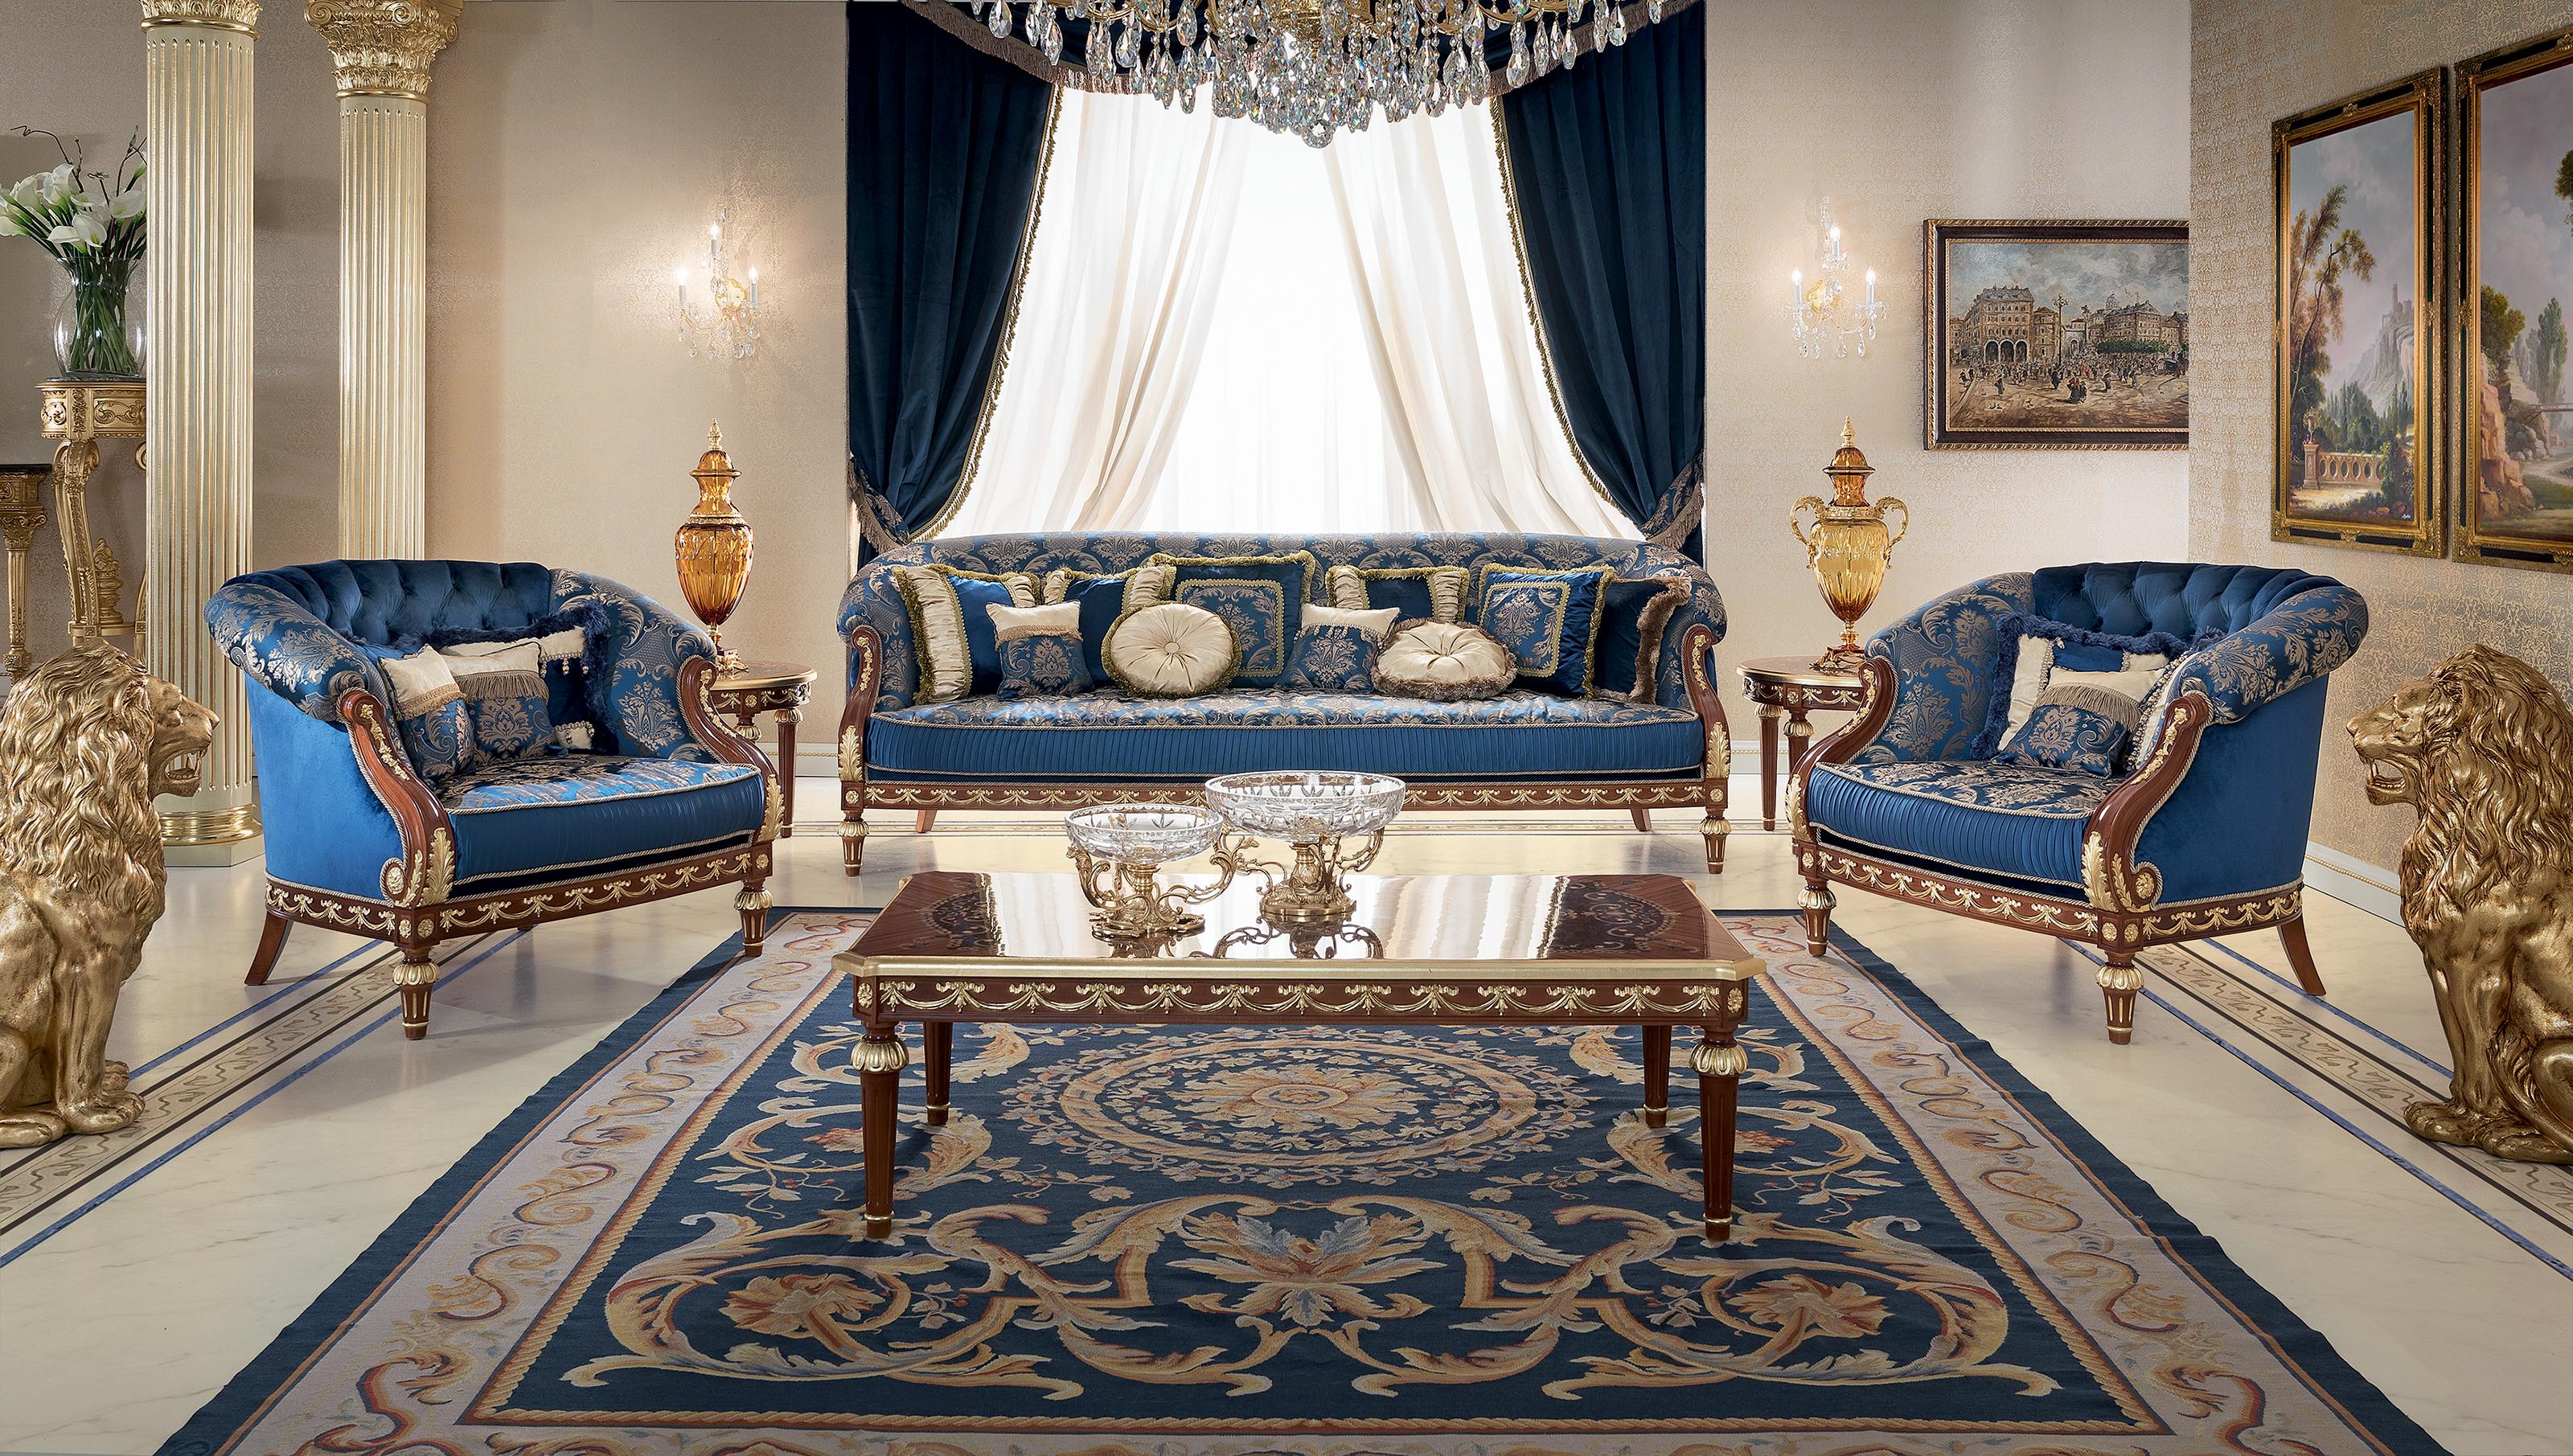 Contemporary  Royal Neoclassical Sofa in High Quality Cherry Wood and Shiny Gold Leaf Decor For Sale